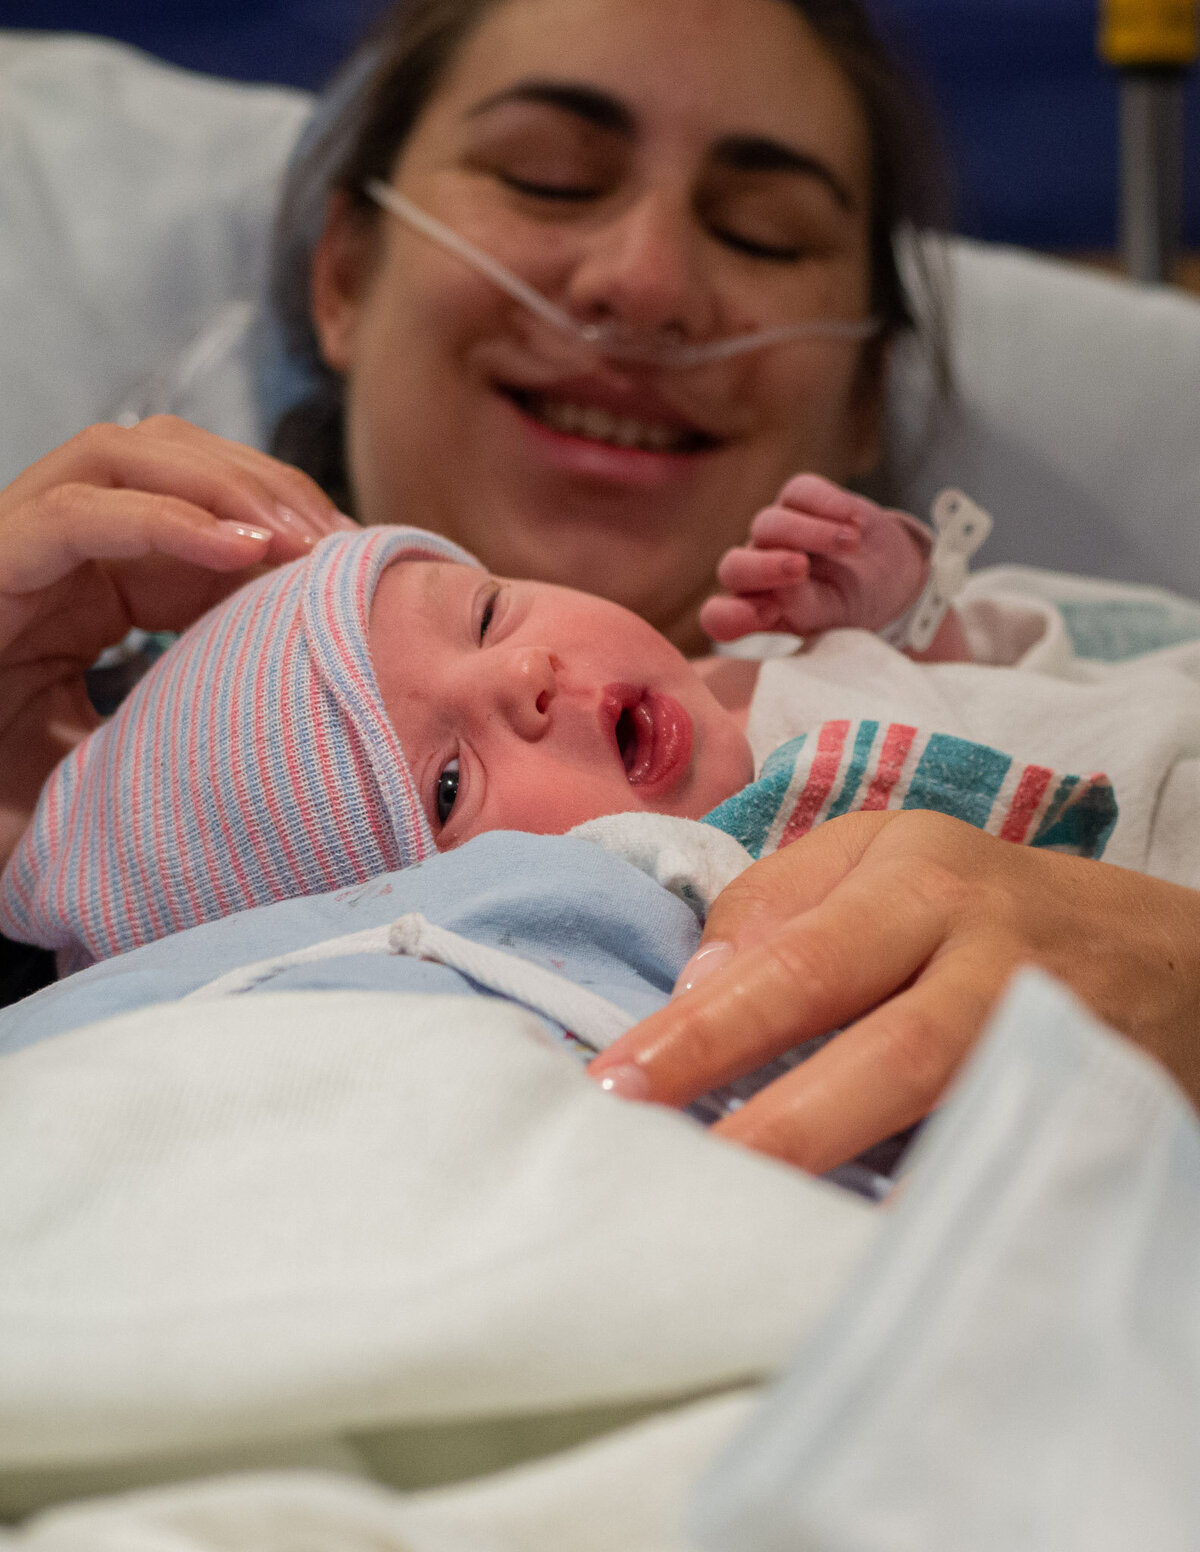 a new mother holds her baby for the first time after a c-section birth.